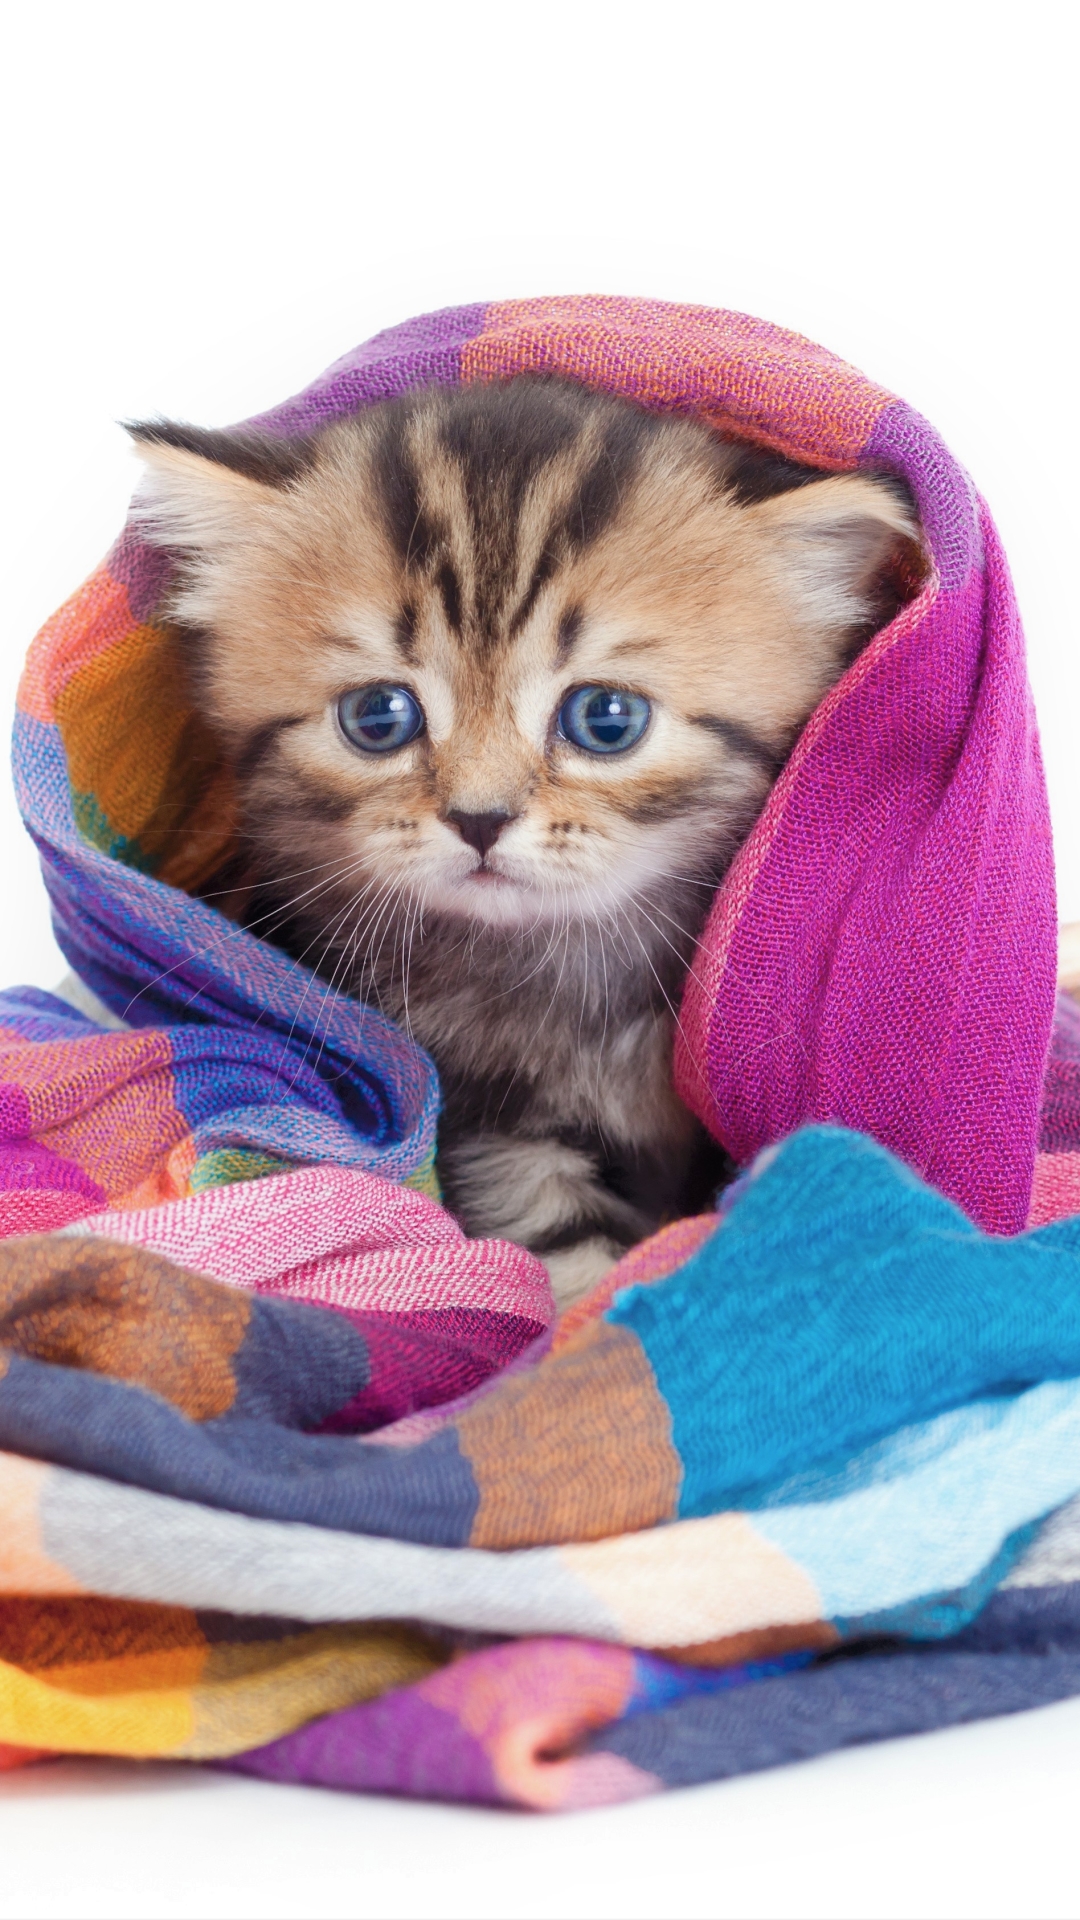 cats, kitten, animal, cat, baby animal, cute, colorful, blanket wallpapers for tablet